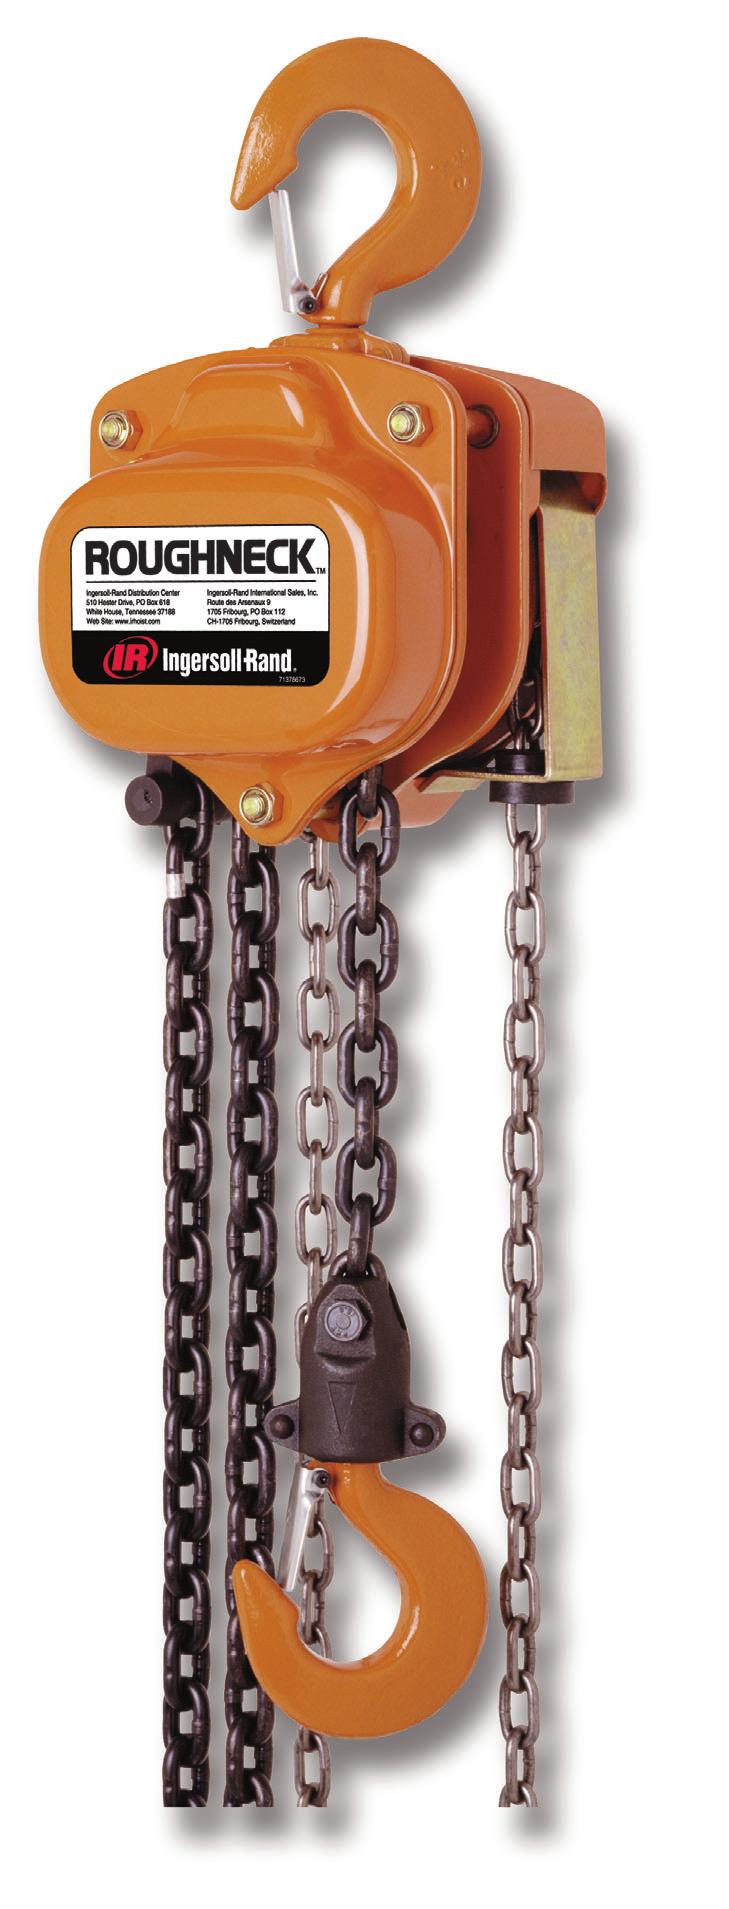 VL2 Premium Series Manual Chain Hoist 1/2 20 metric ton Lifting Capacity Our top of the line manual chain hoist, the VL2 Series exclusive hand chain guide provides smooth, even operation and